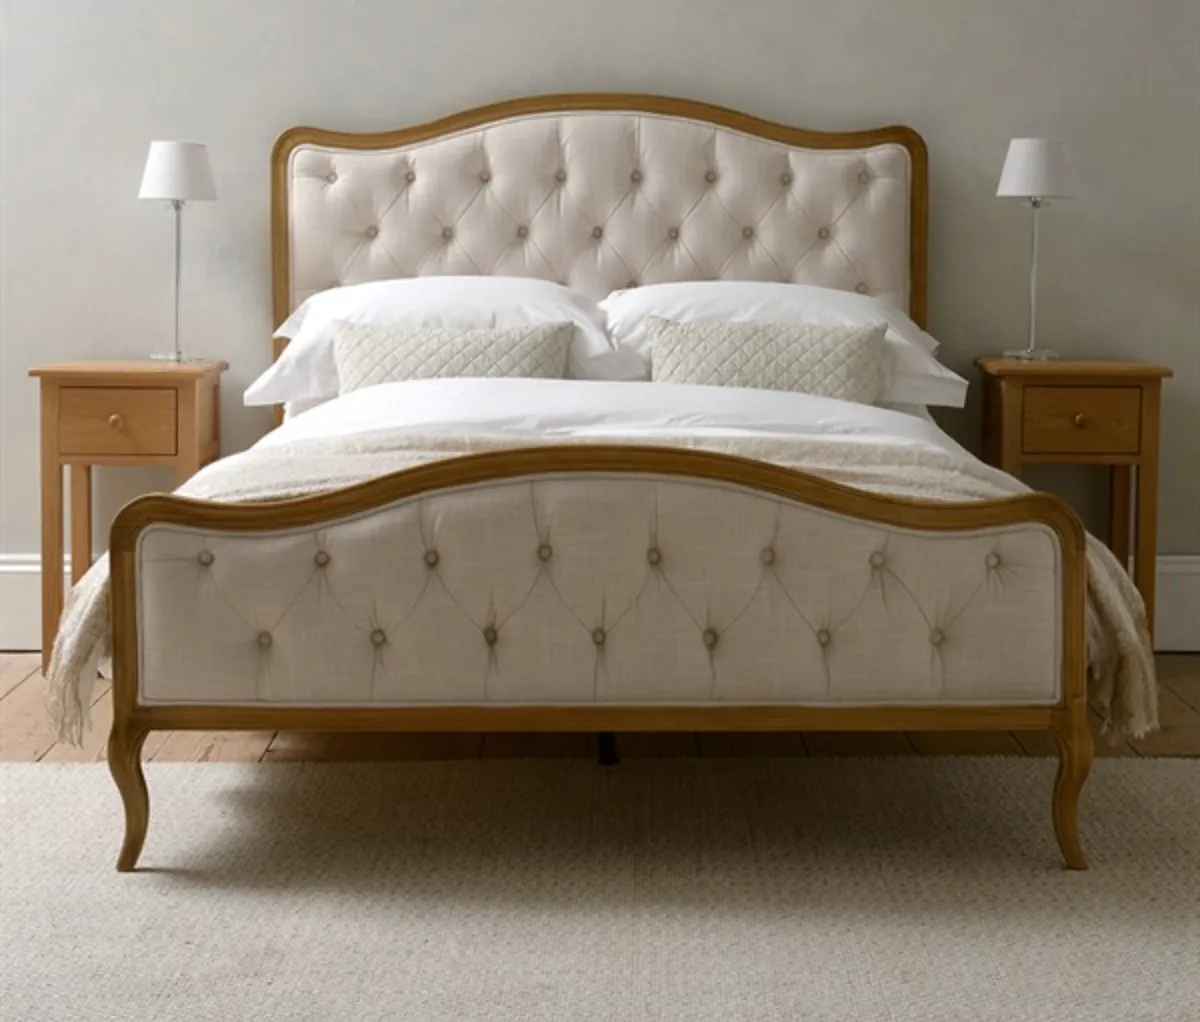 Kingham 4ft 6” Double Bed, The Cotswold Company